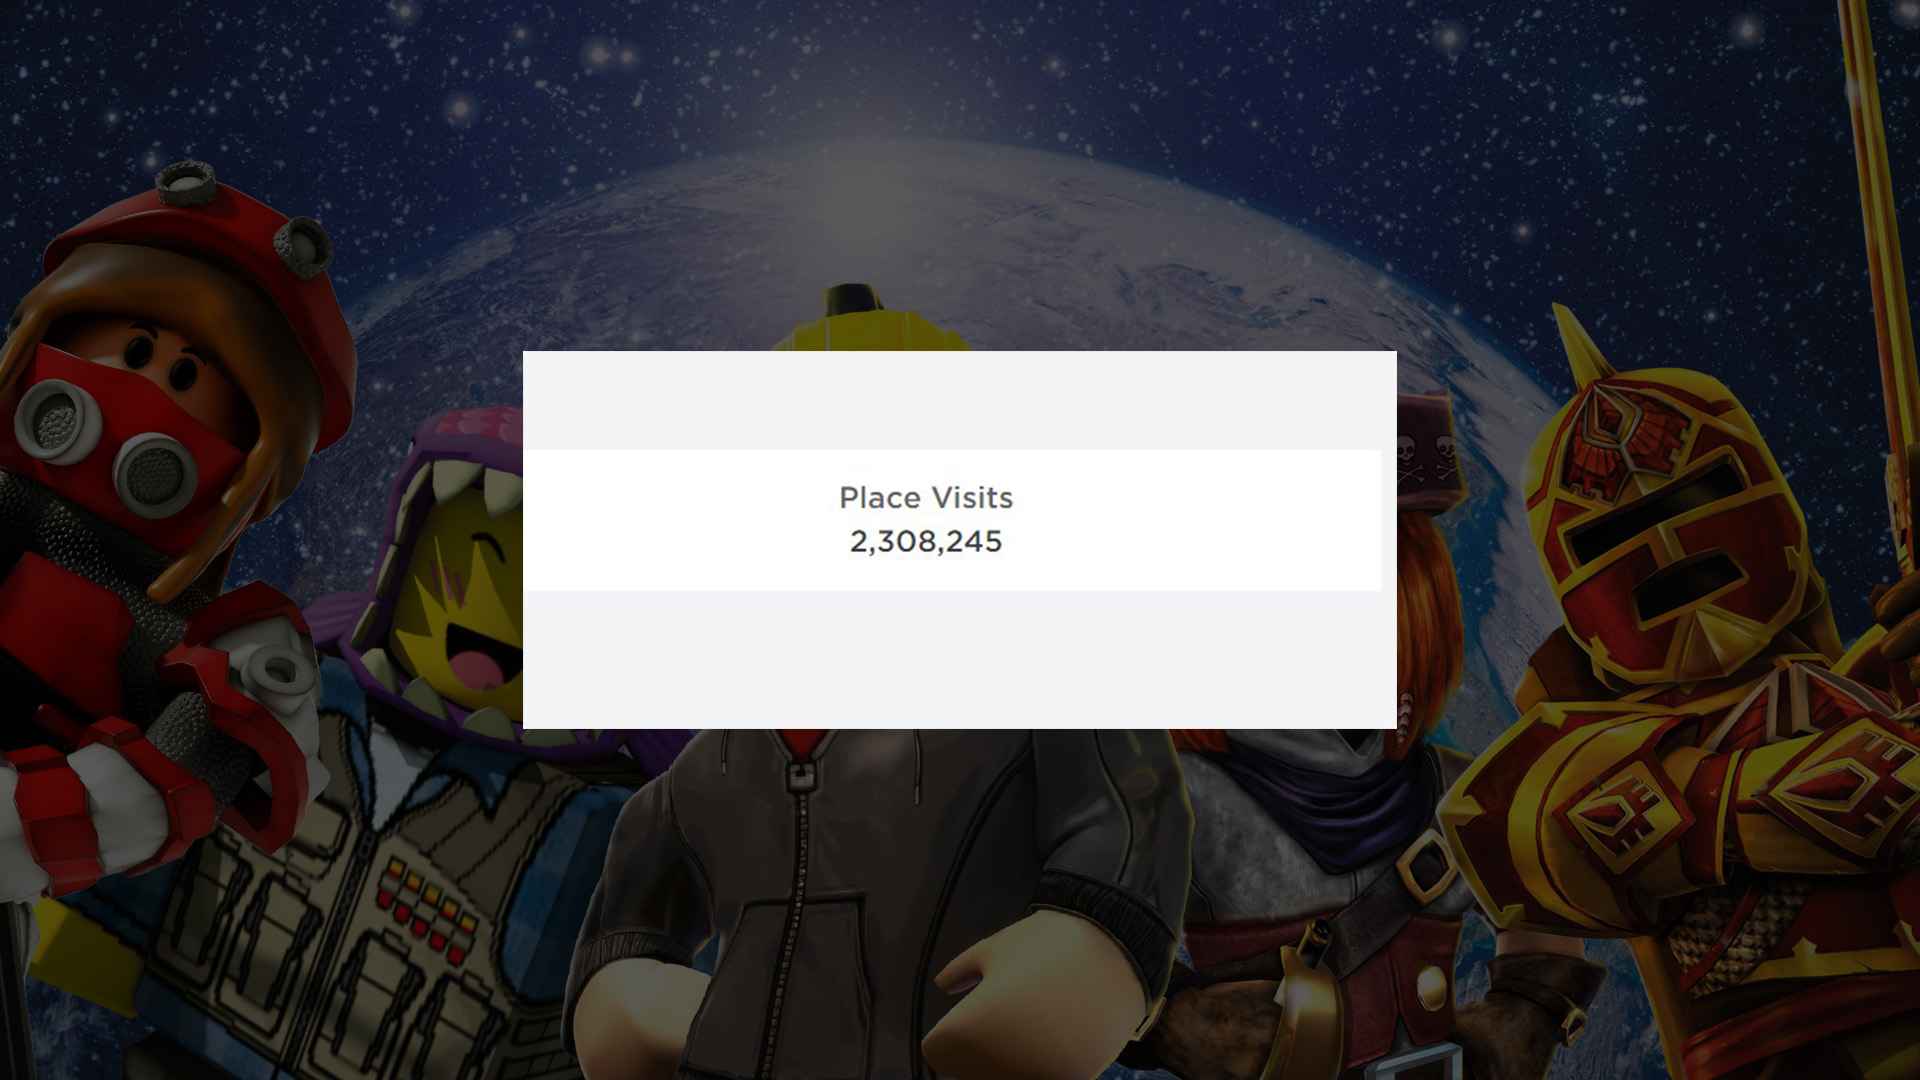 Place Visits in Roblox